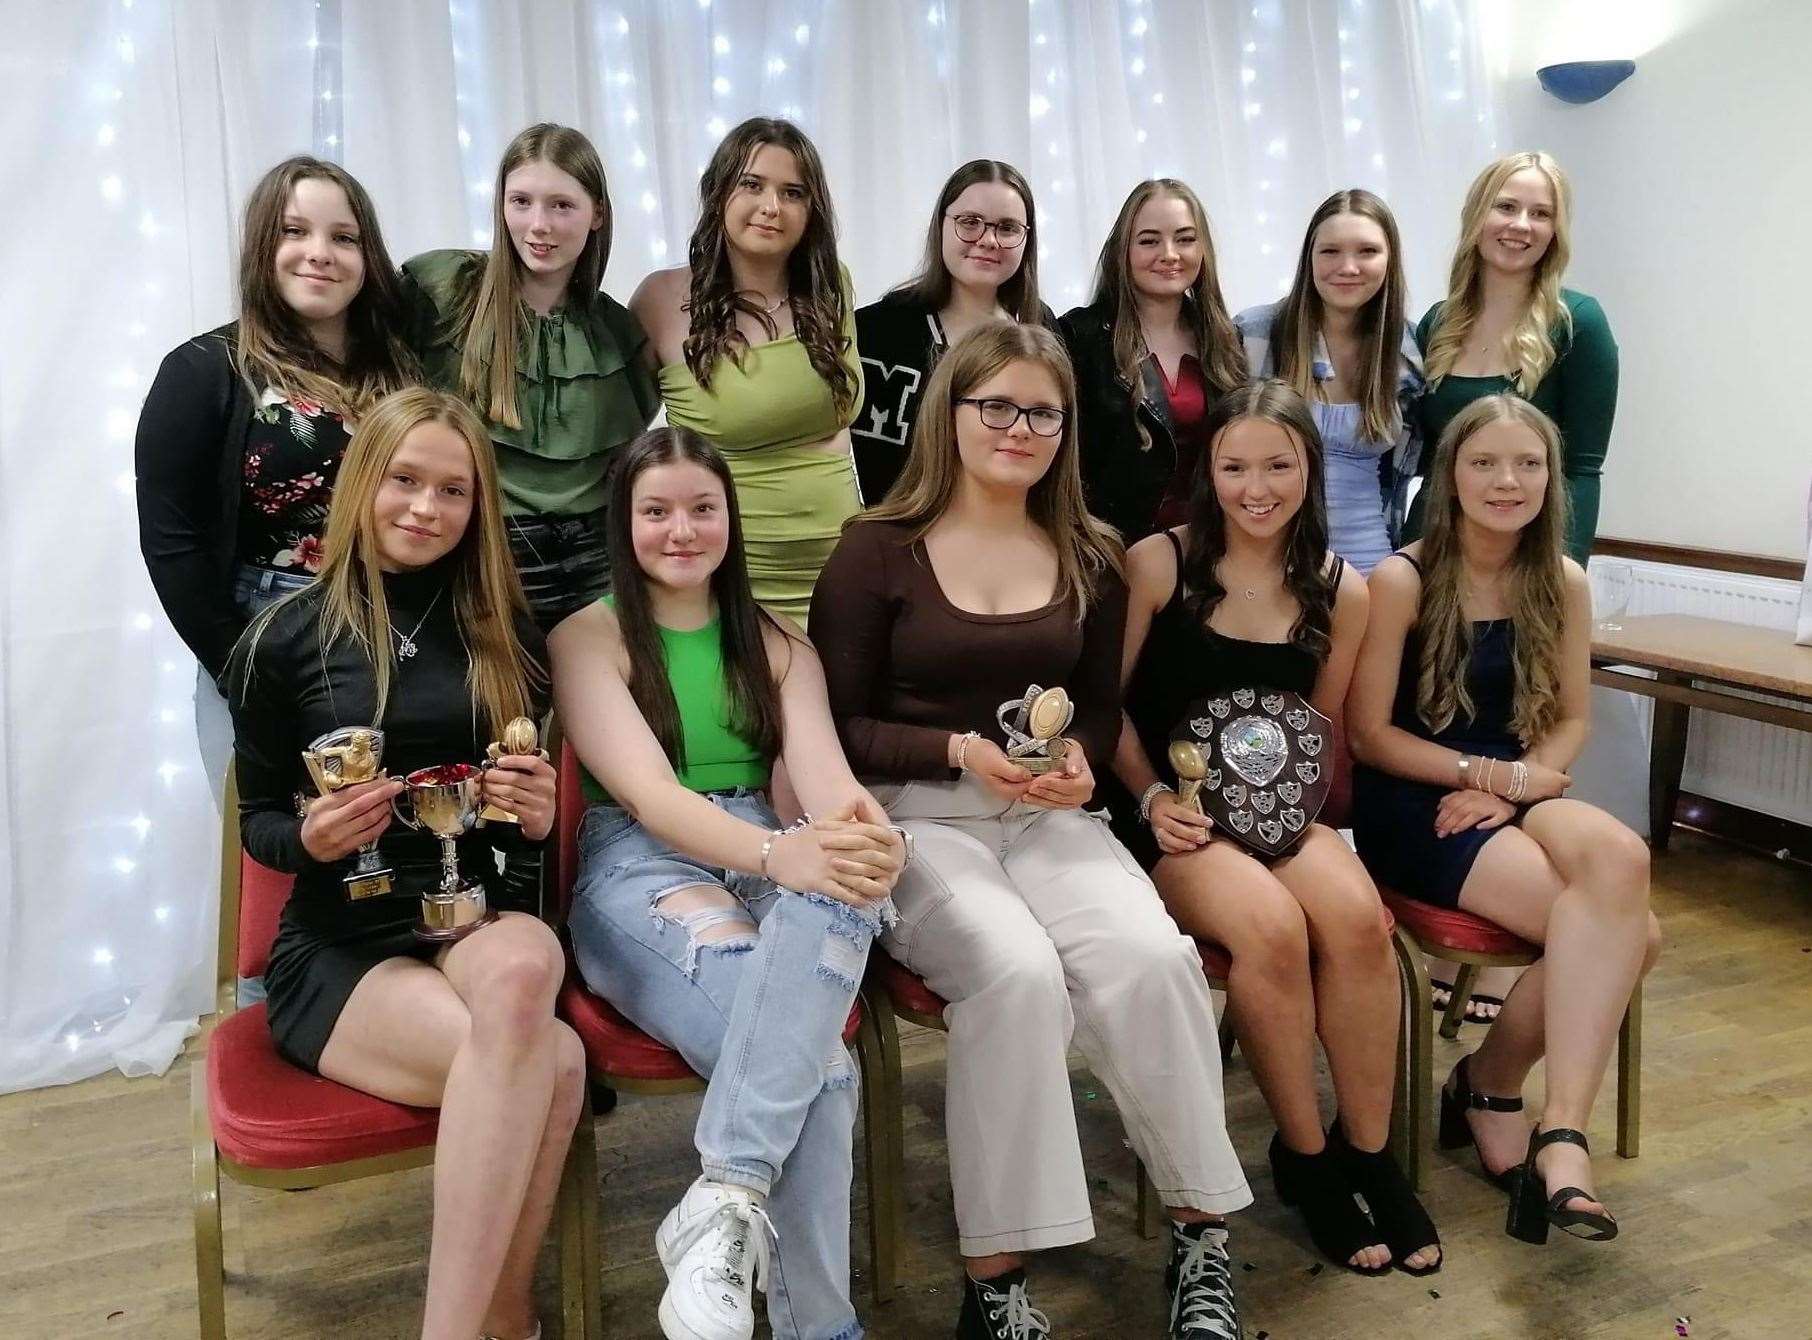 Under-16s from Caithness Rugby Football Club girls' section.